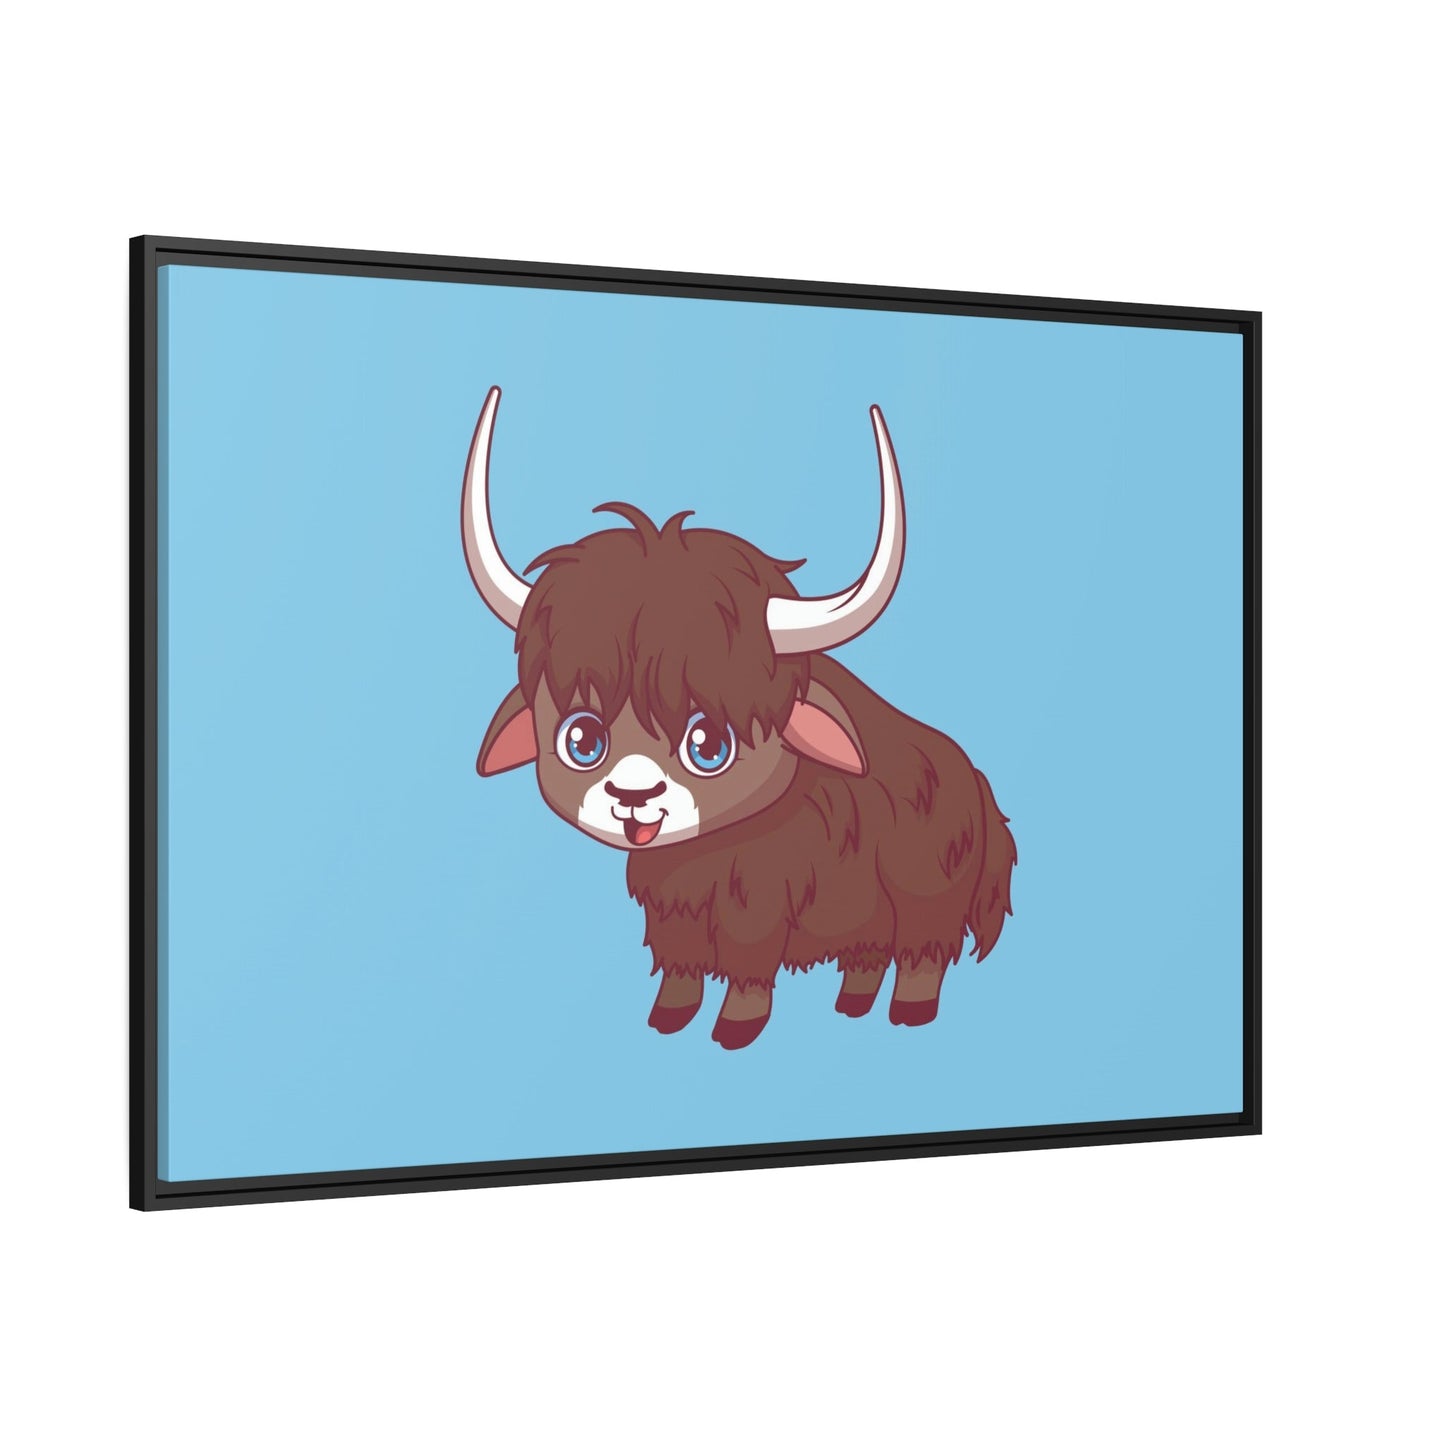 Adorable Bovine: Framed Poster Wall Art Featuring a Sweet Cow Portrait for Kids' Room Decor